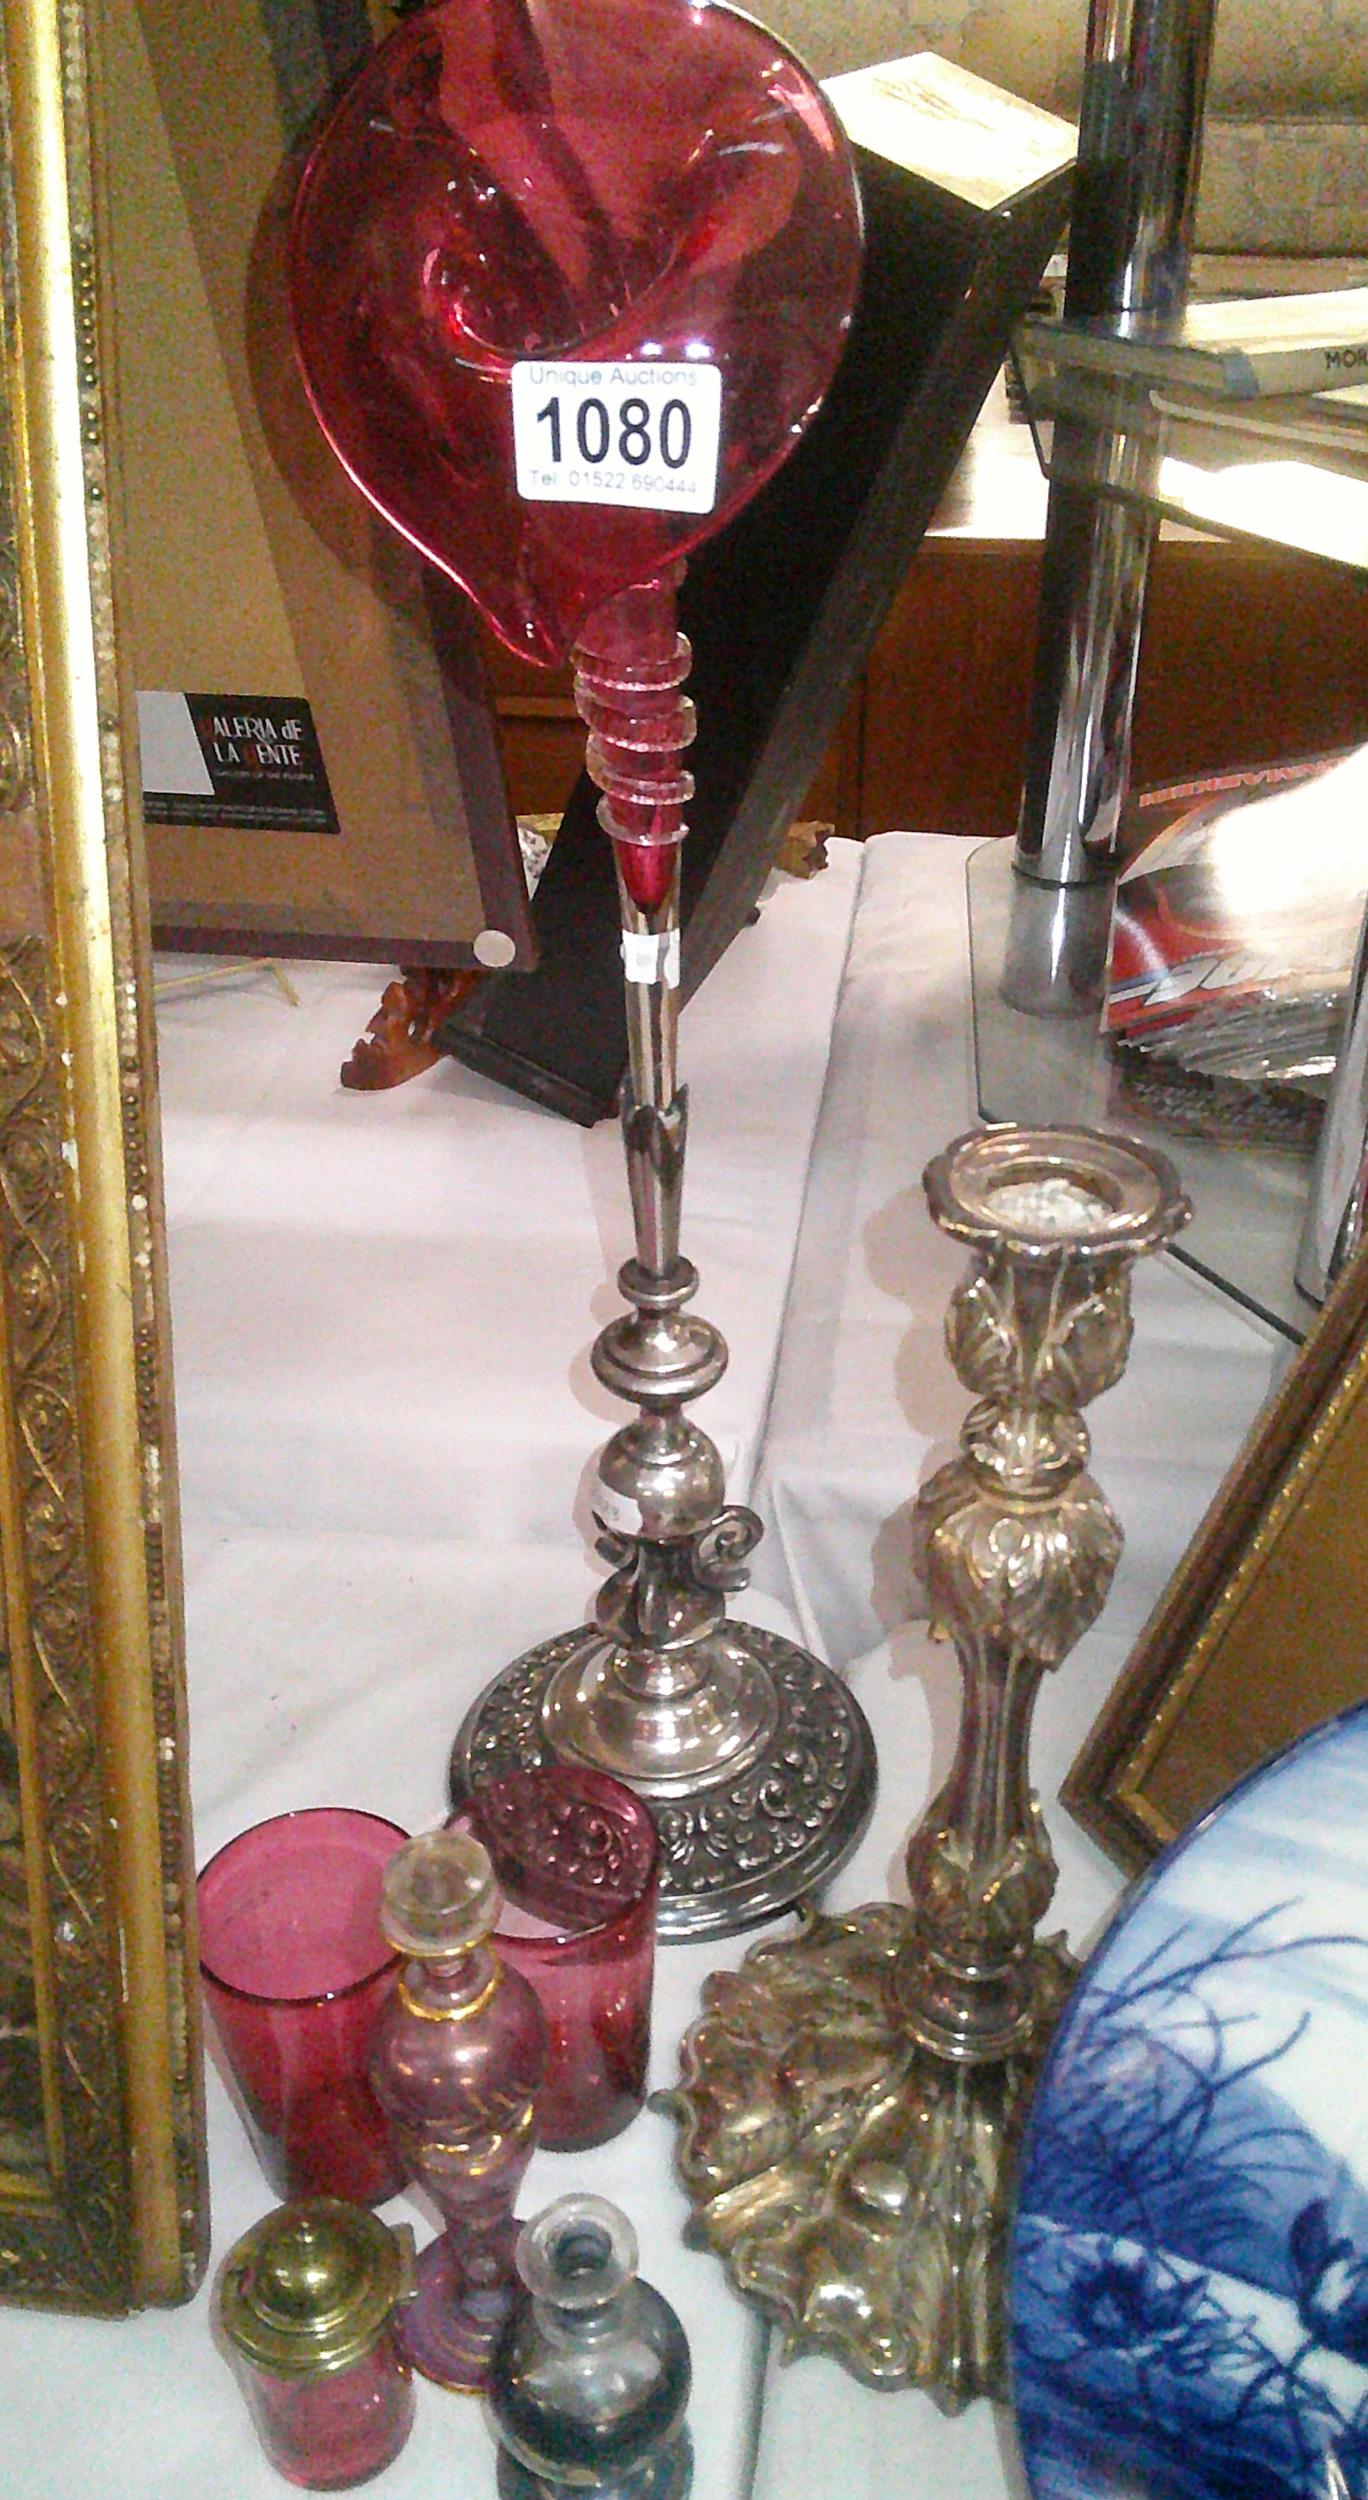 A victorian cranberry glass jack in the pulpitepergne on silver plated stand, along with perfume